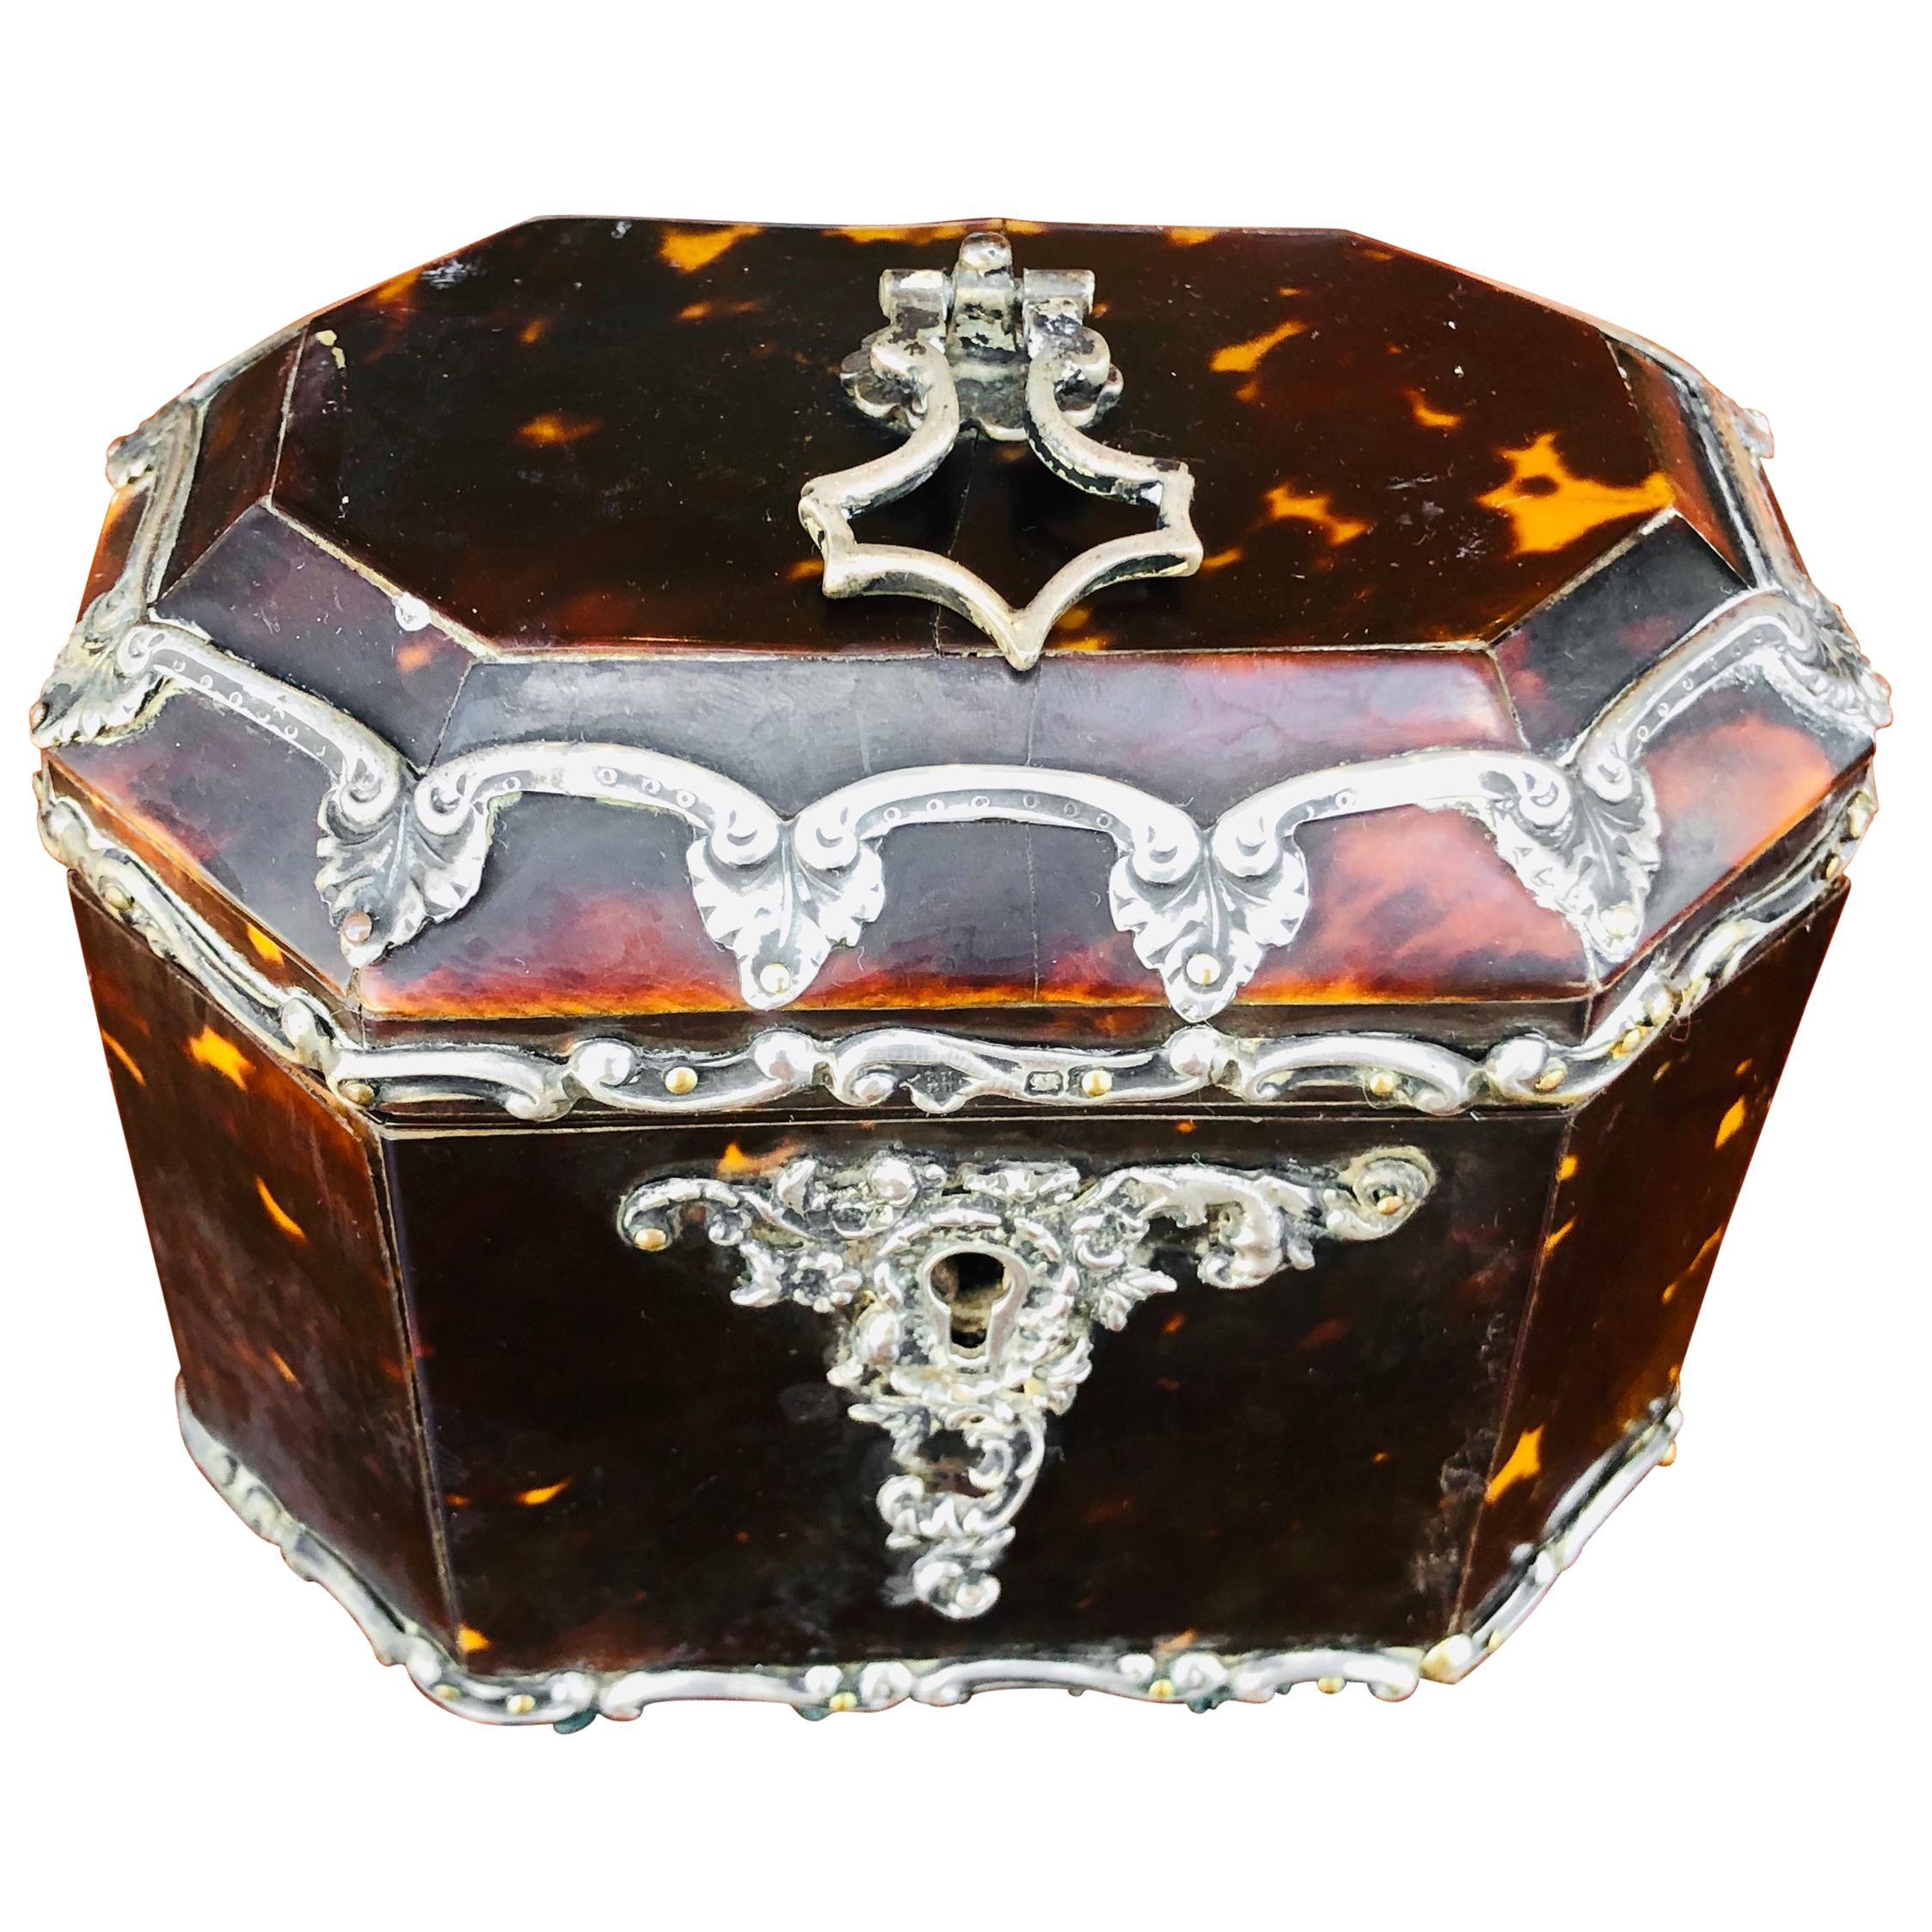 Diminutive English Tea Caddy of Tortoise Shell with Sterling Silver Mounts